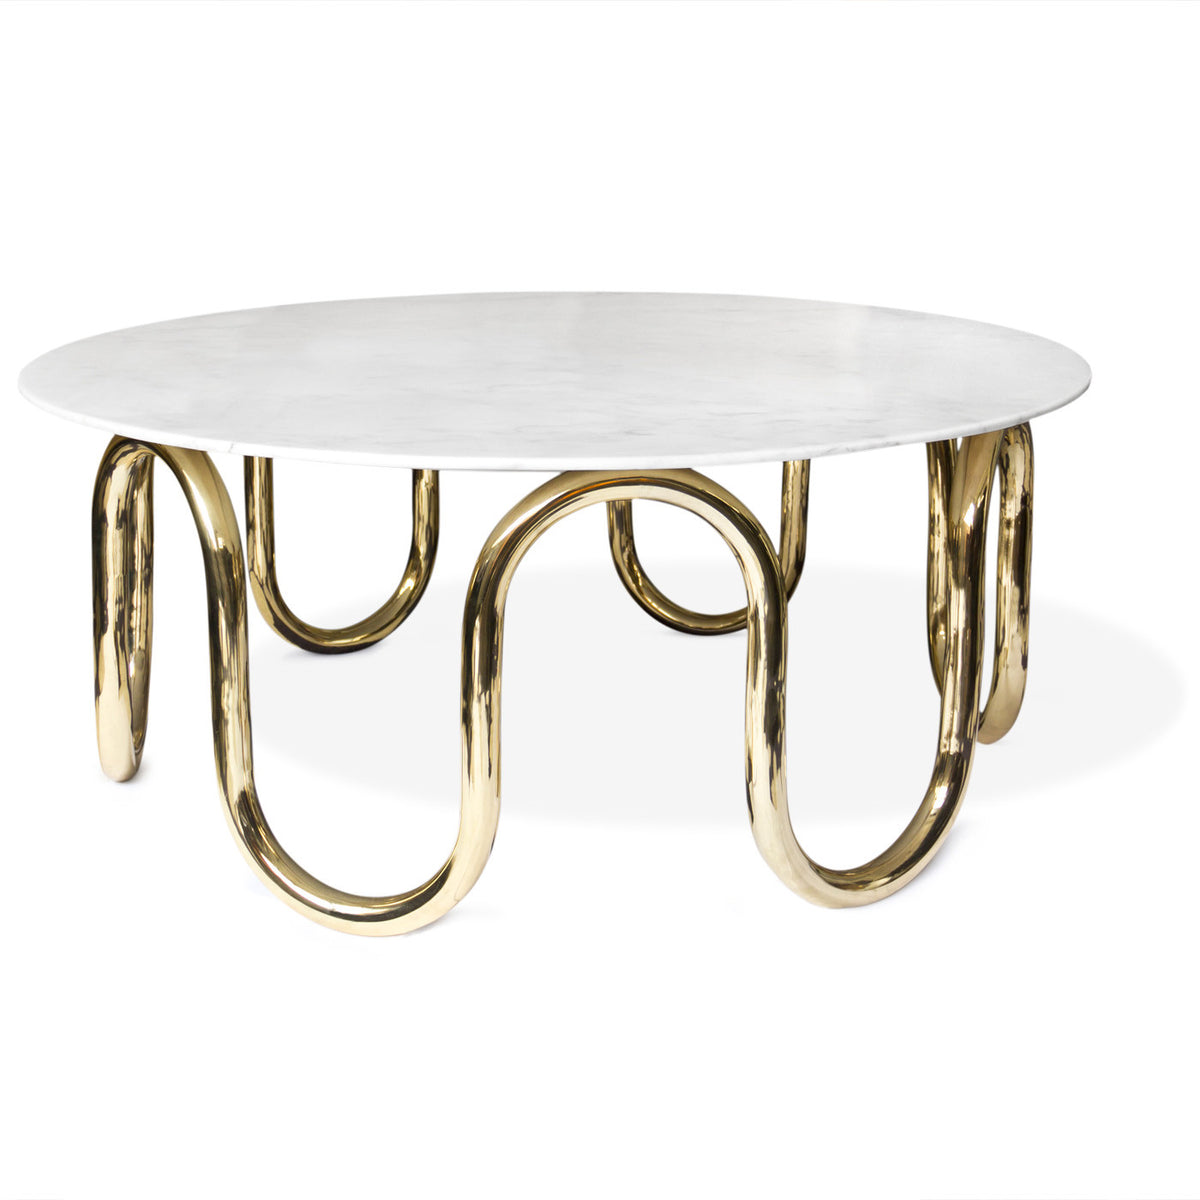 Scalinatella Cocktail Table by Jonathan Adler